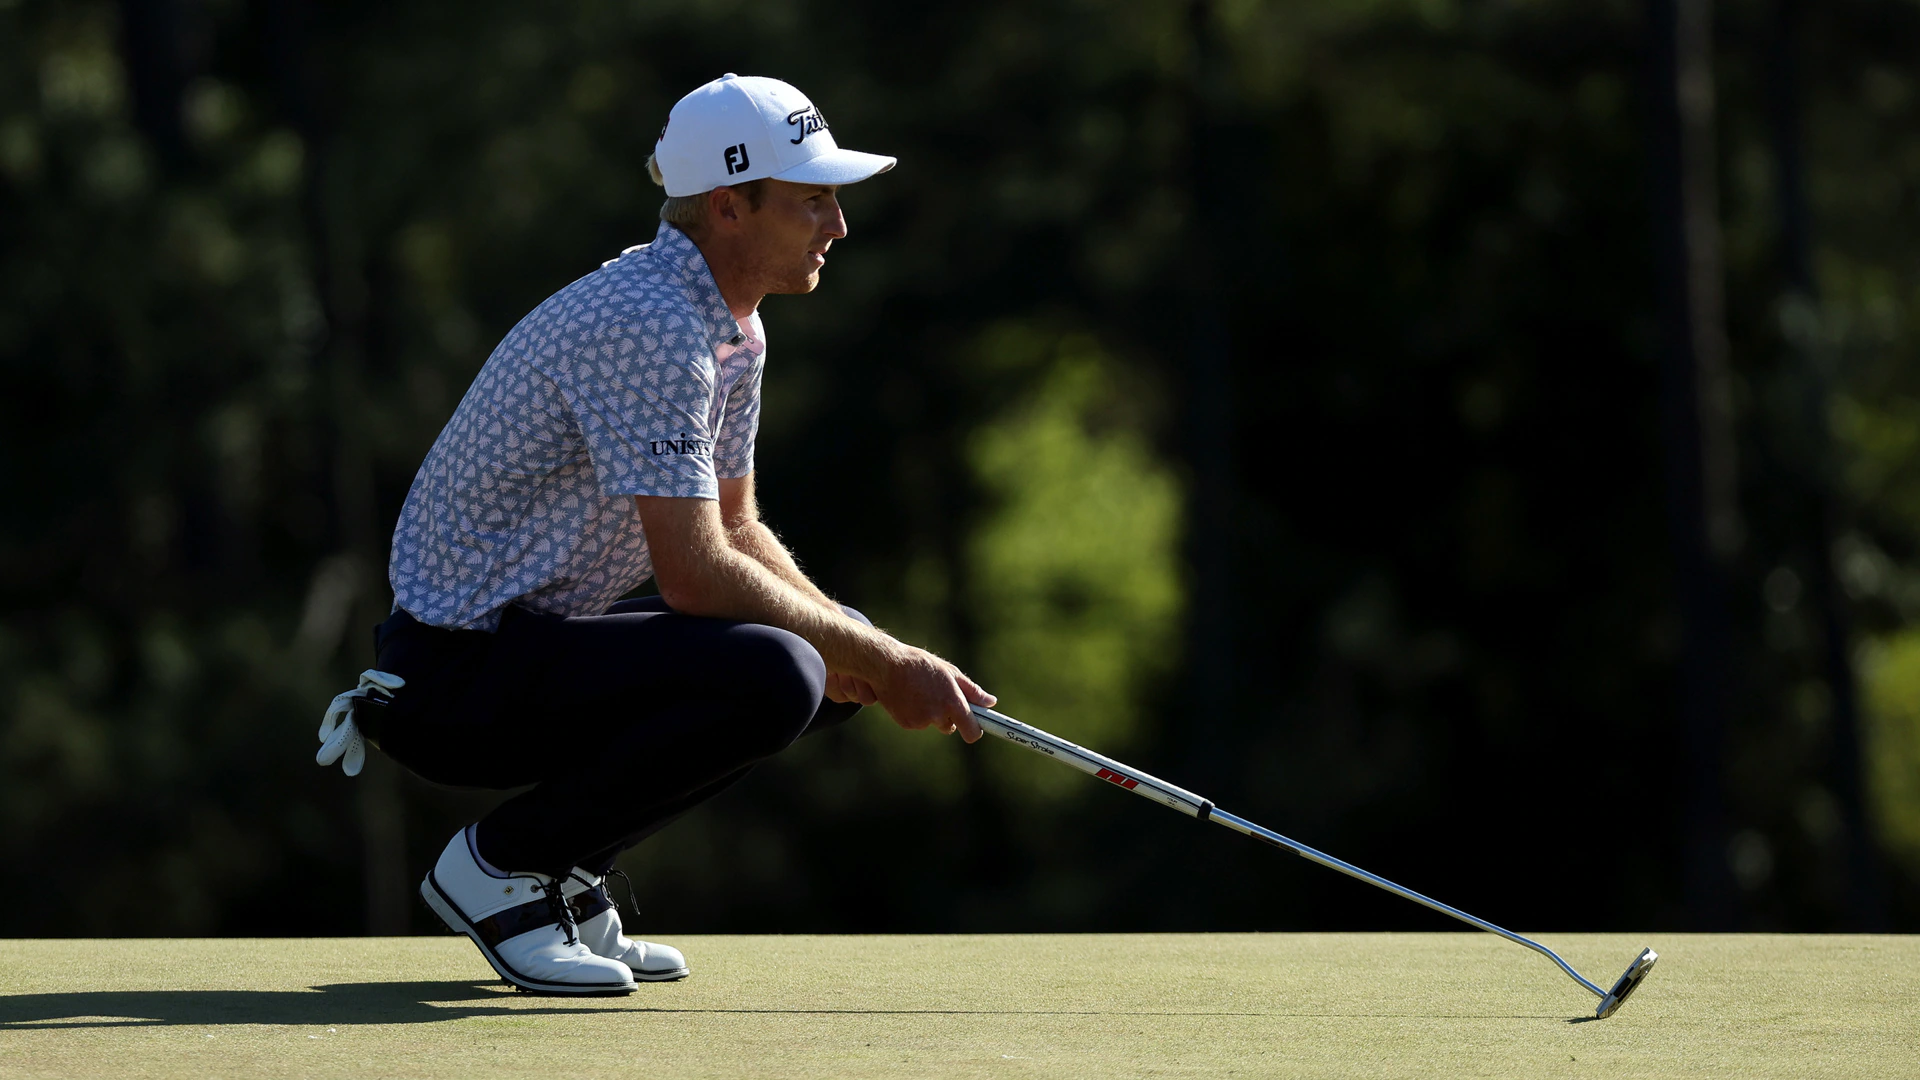 Will Zalatoris ‘putting nicely’ as he looks for first PGA Tour win at AT&T Byron Nelson